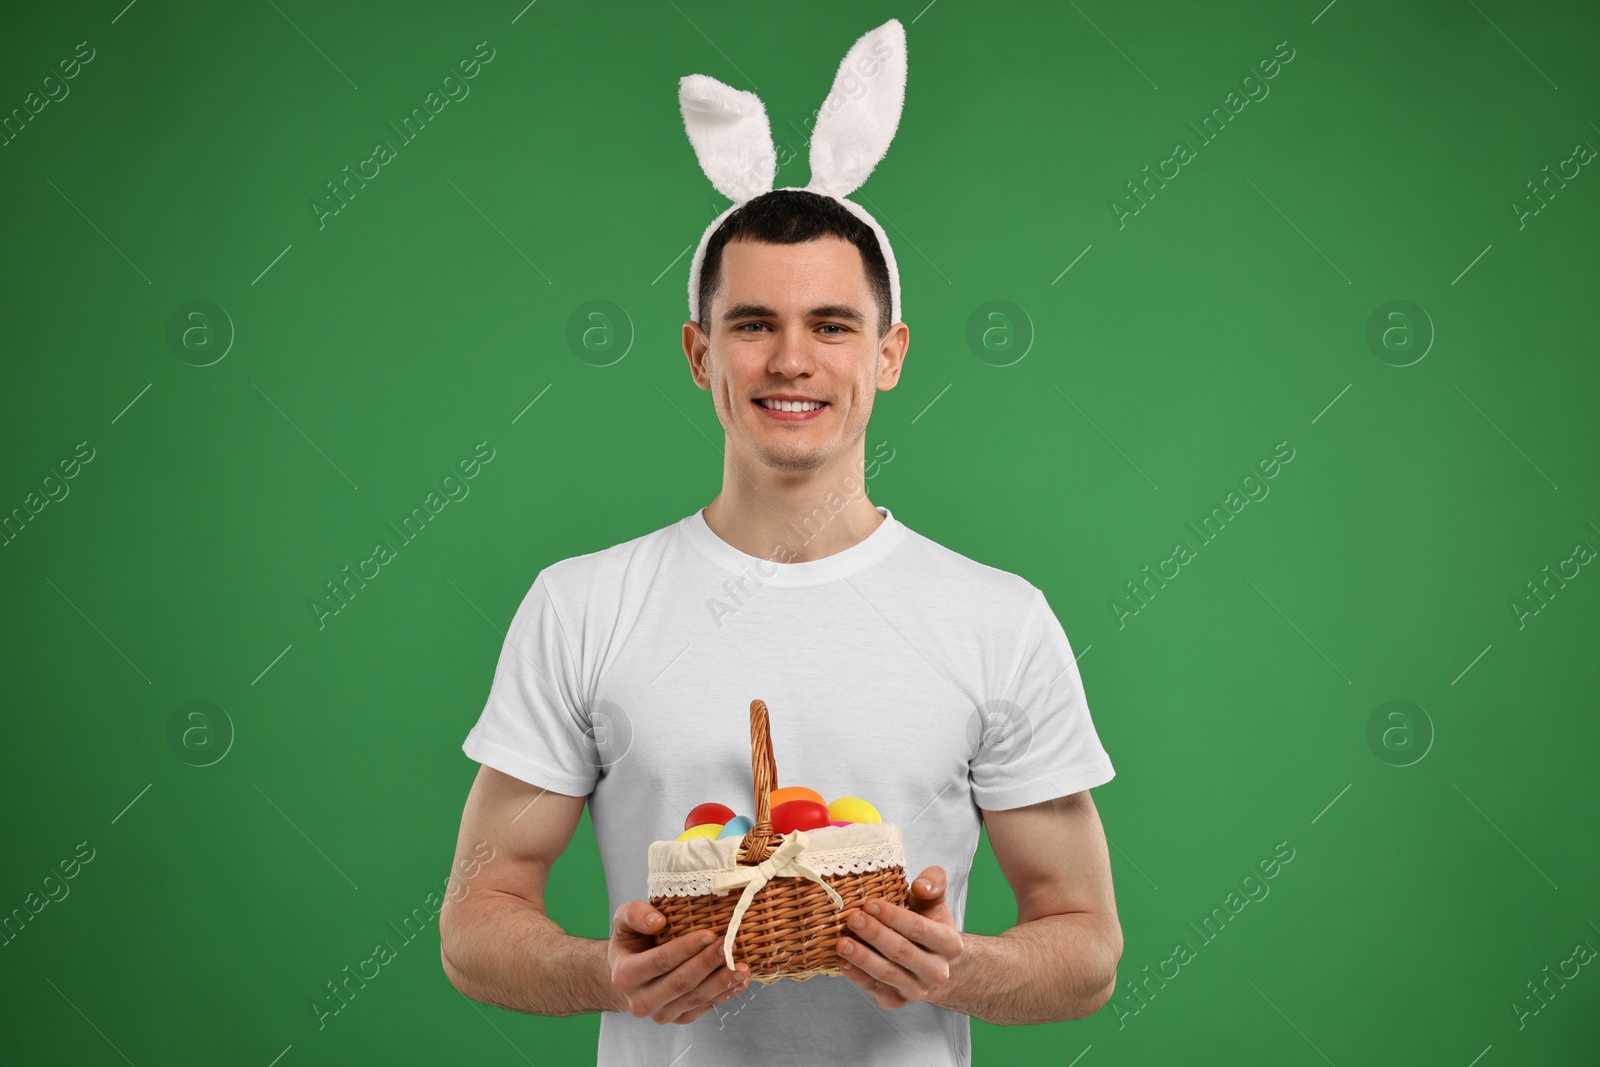 Photo of Easter celebration. Handsome young man with bunny ears holding basket of painted eggs on green background